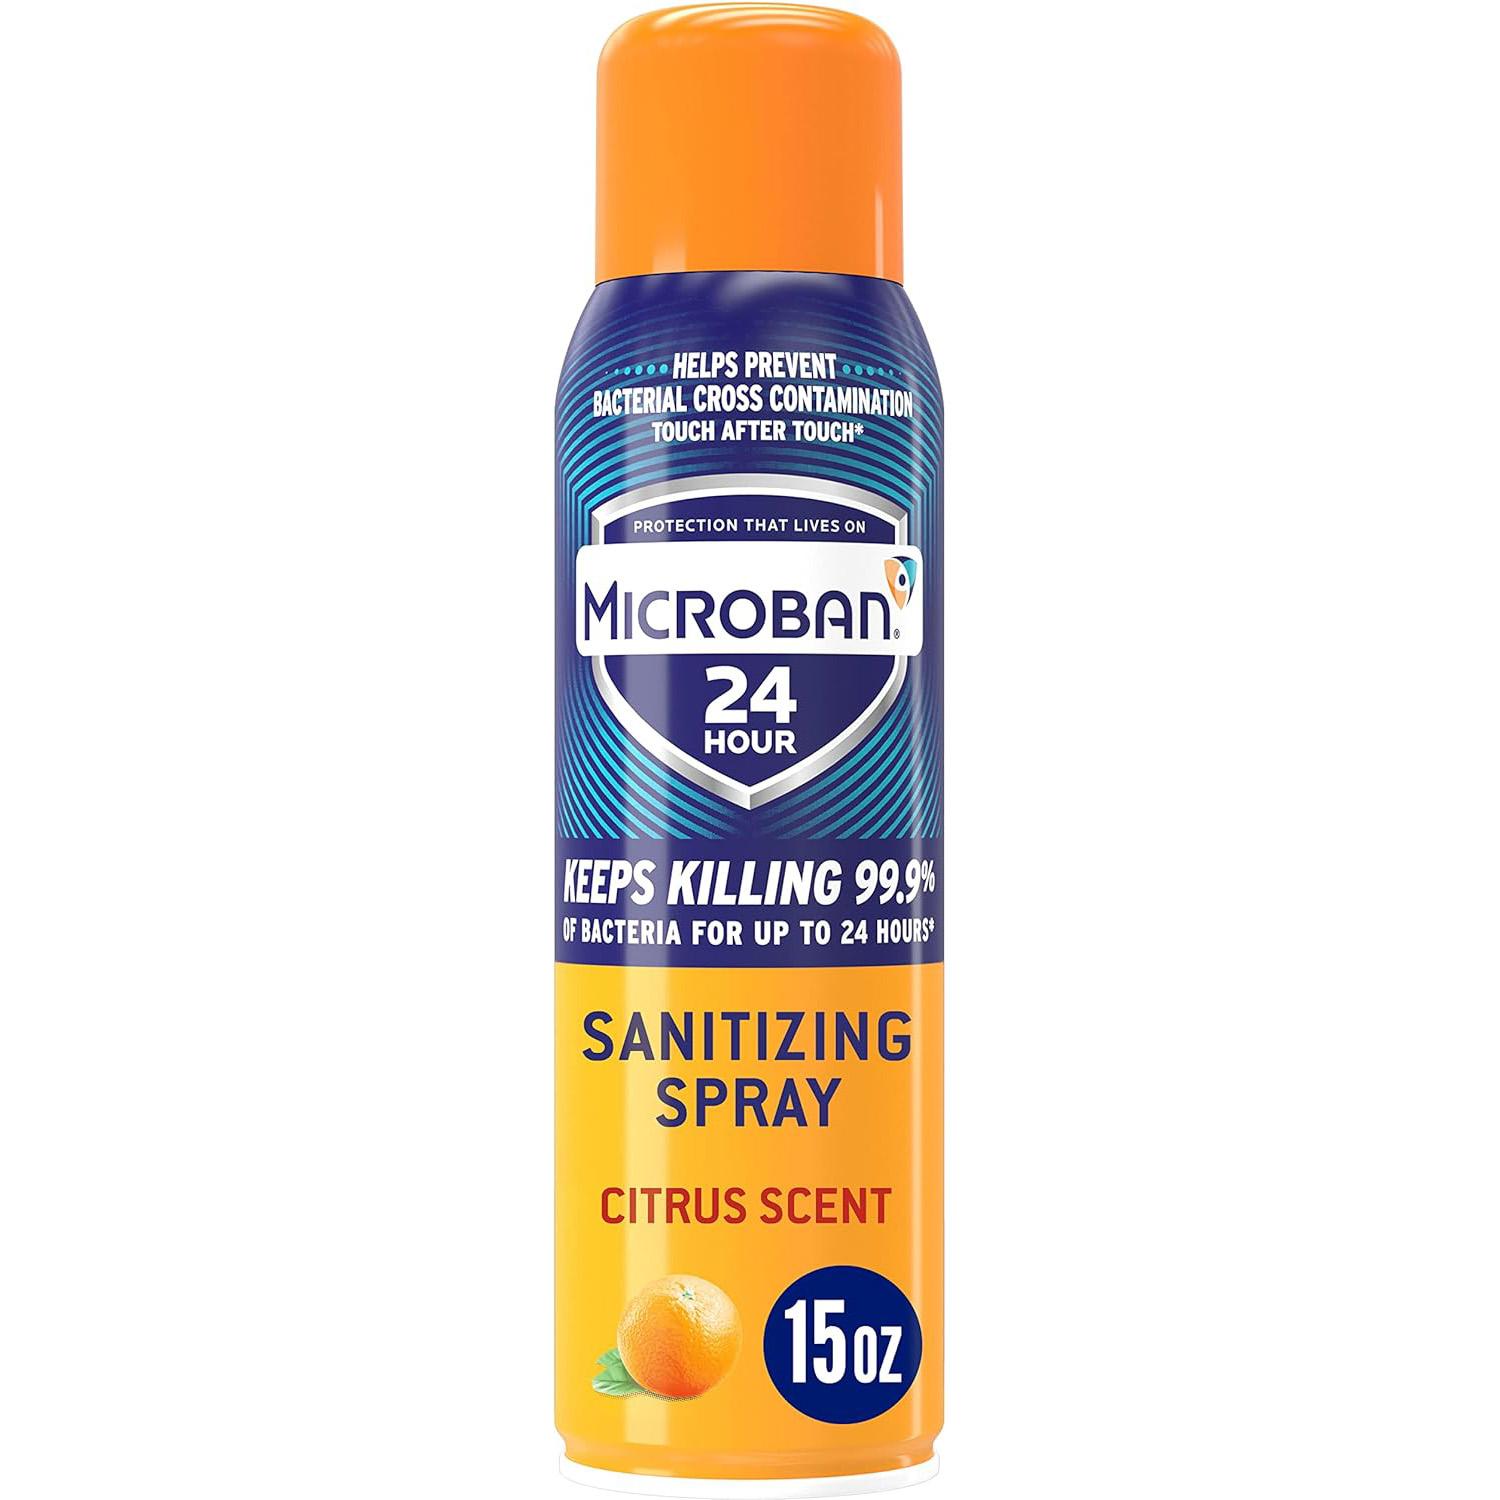 Microban 24 Hour Disinfectant Sanitizing Spray for $1.97 Shipped